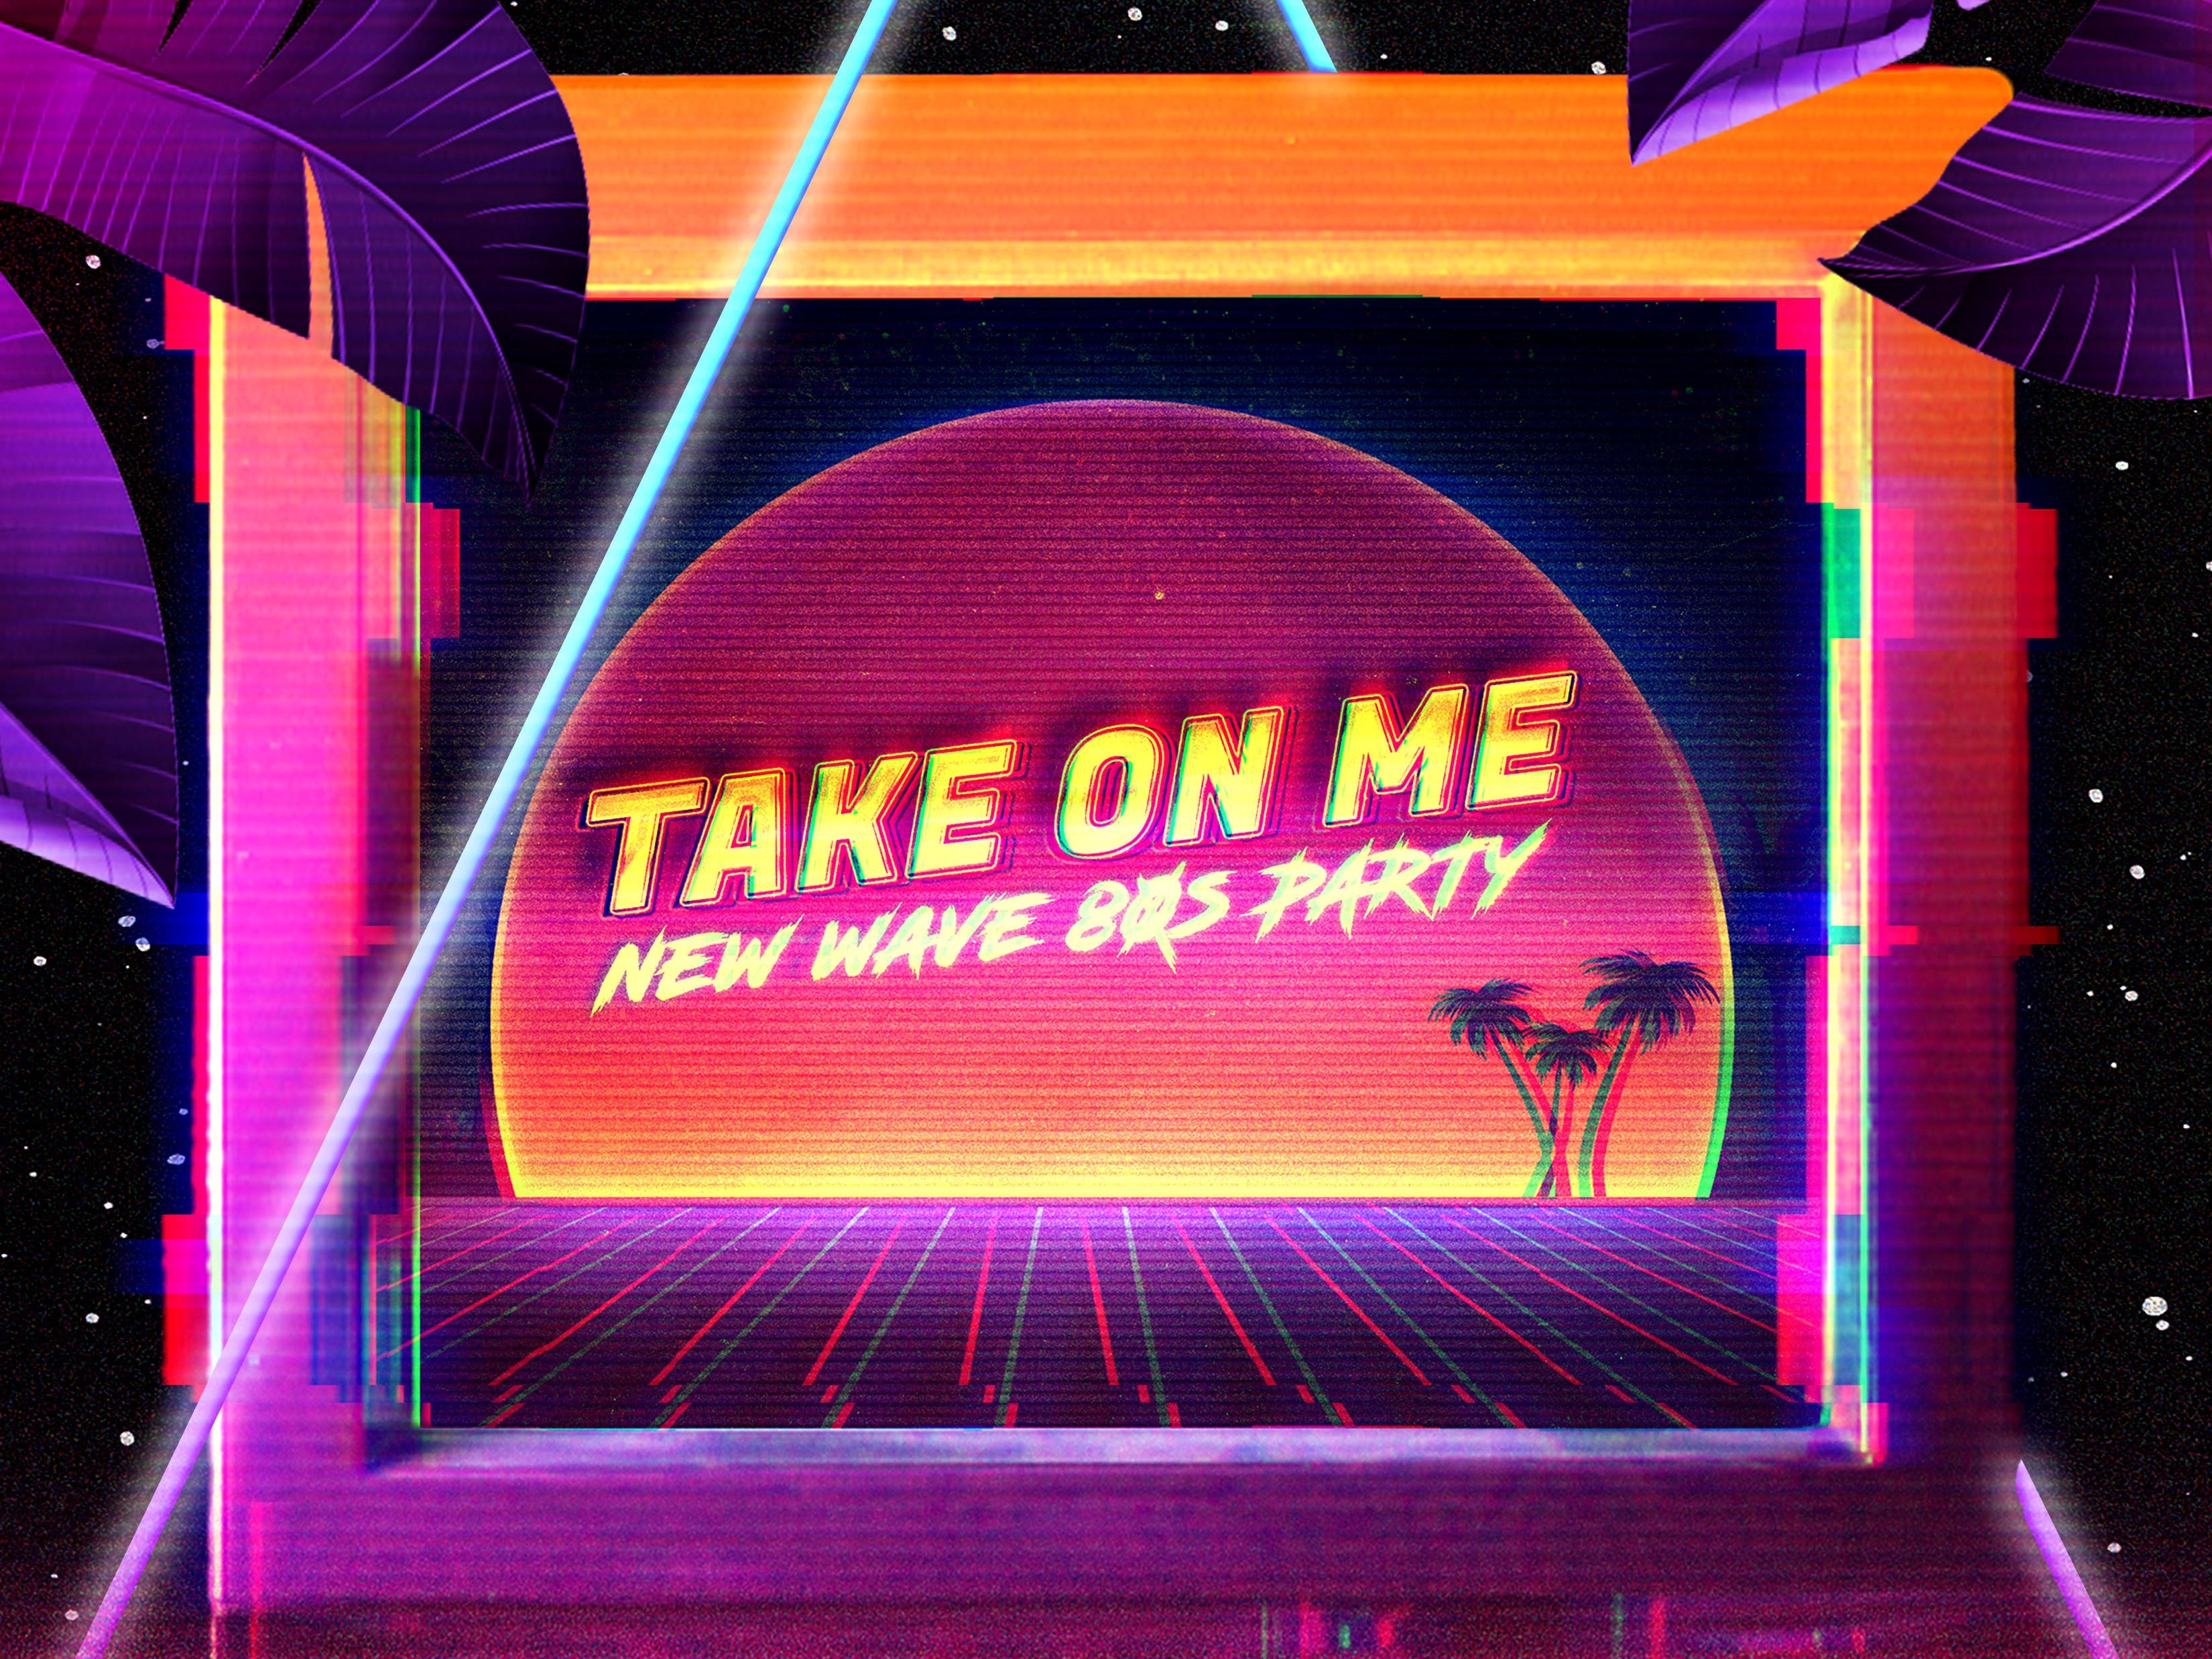 Take On Me - New Wave 80's Party free presale passcode for early tickets in New Orleans